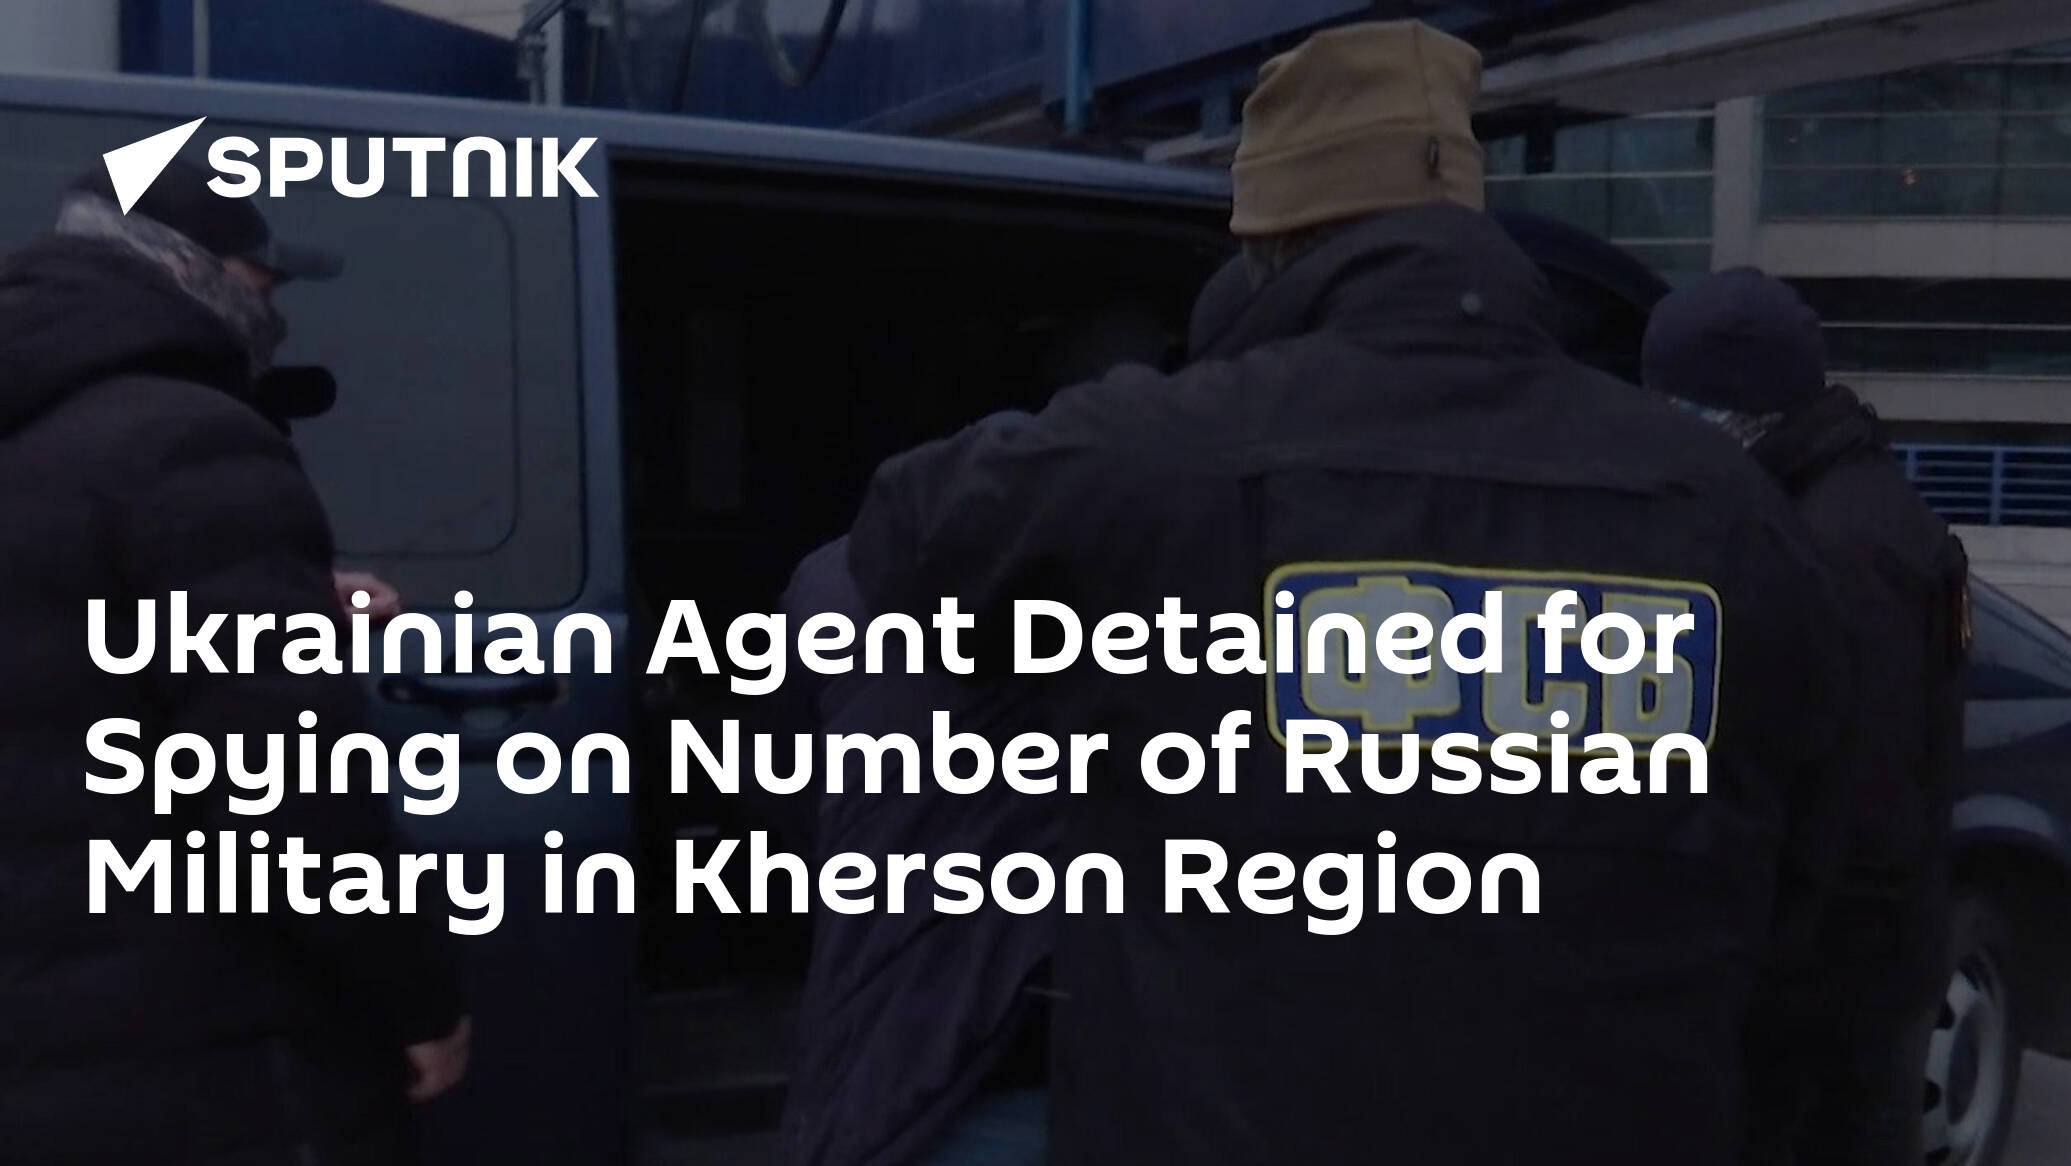 Ukrainian Agent Detained for Spying on Number of Russian Military in Kherson Region